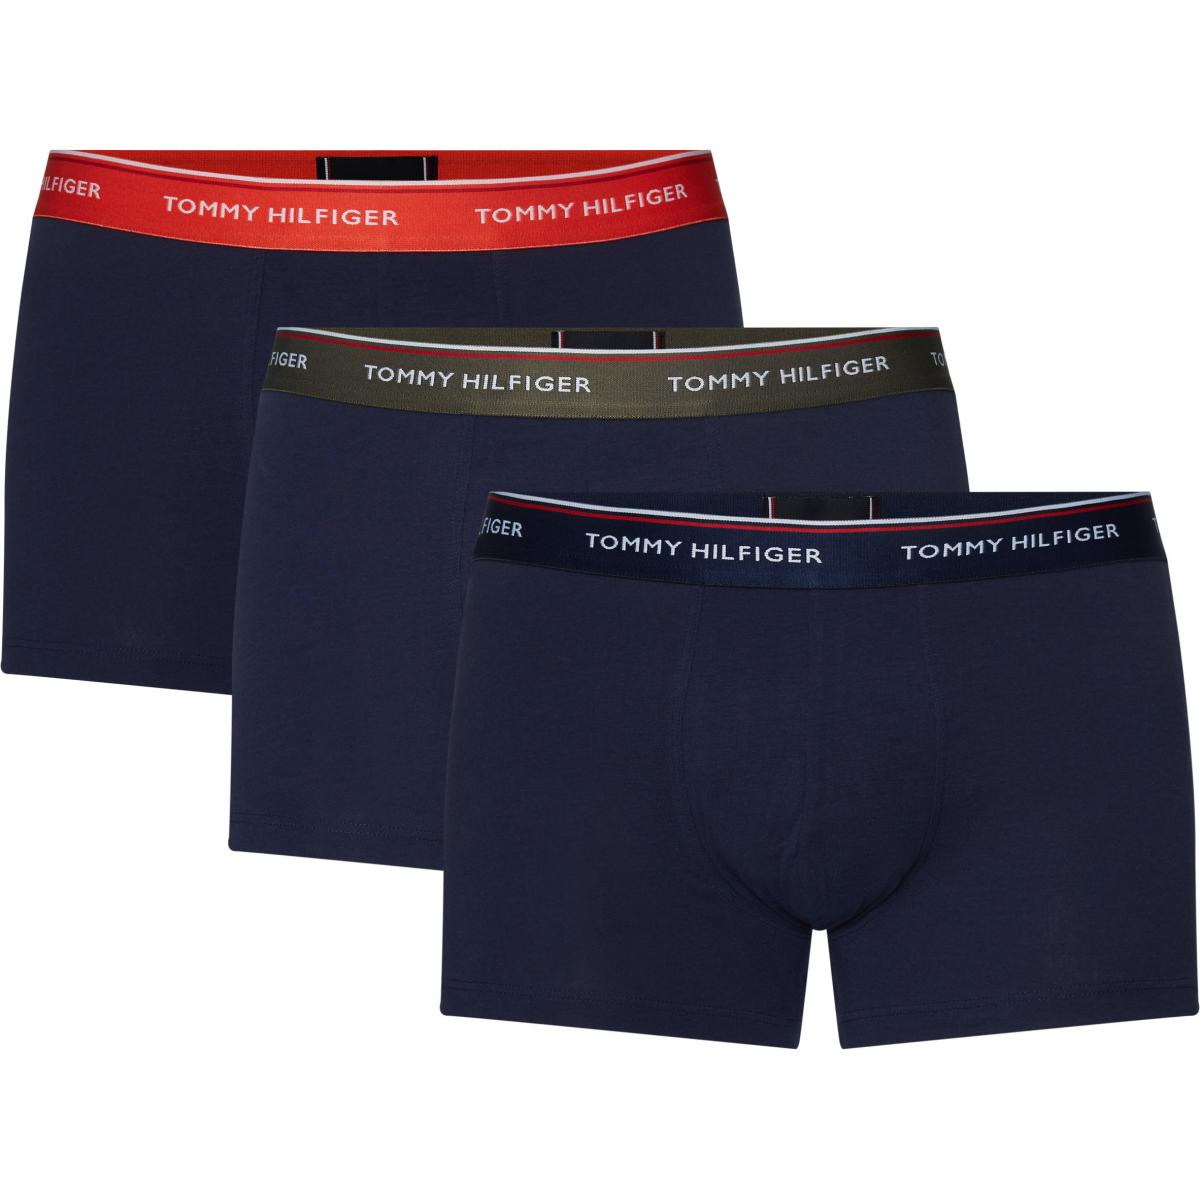 calecon tommy hilfiger homme